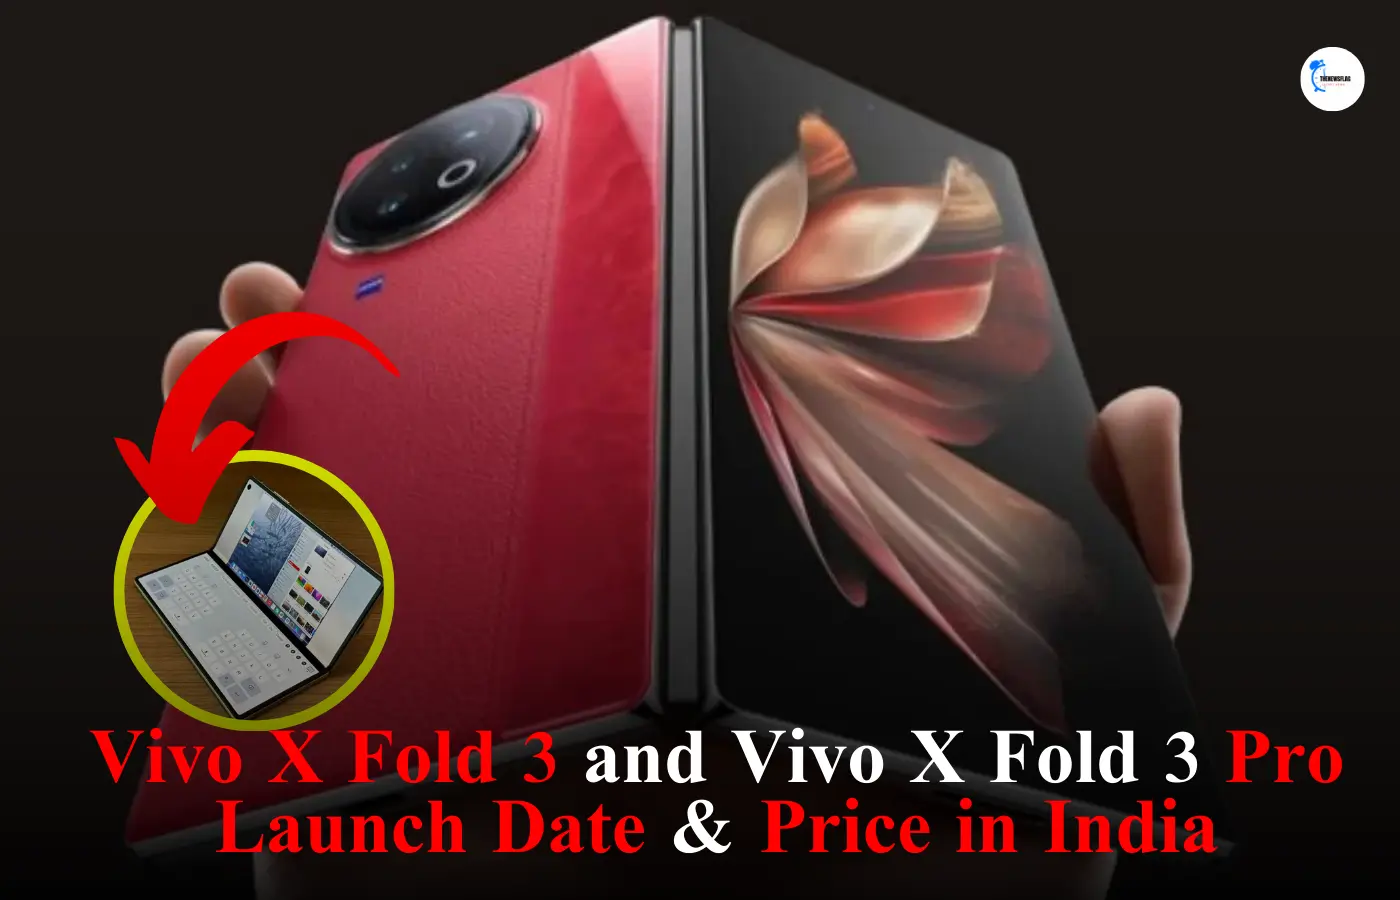 Vivo X Fold 3 and Vivo X Fold 3 Pro Launch Date in India